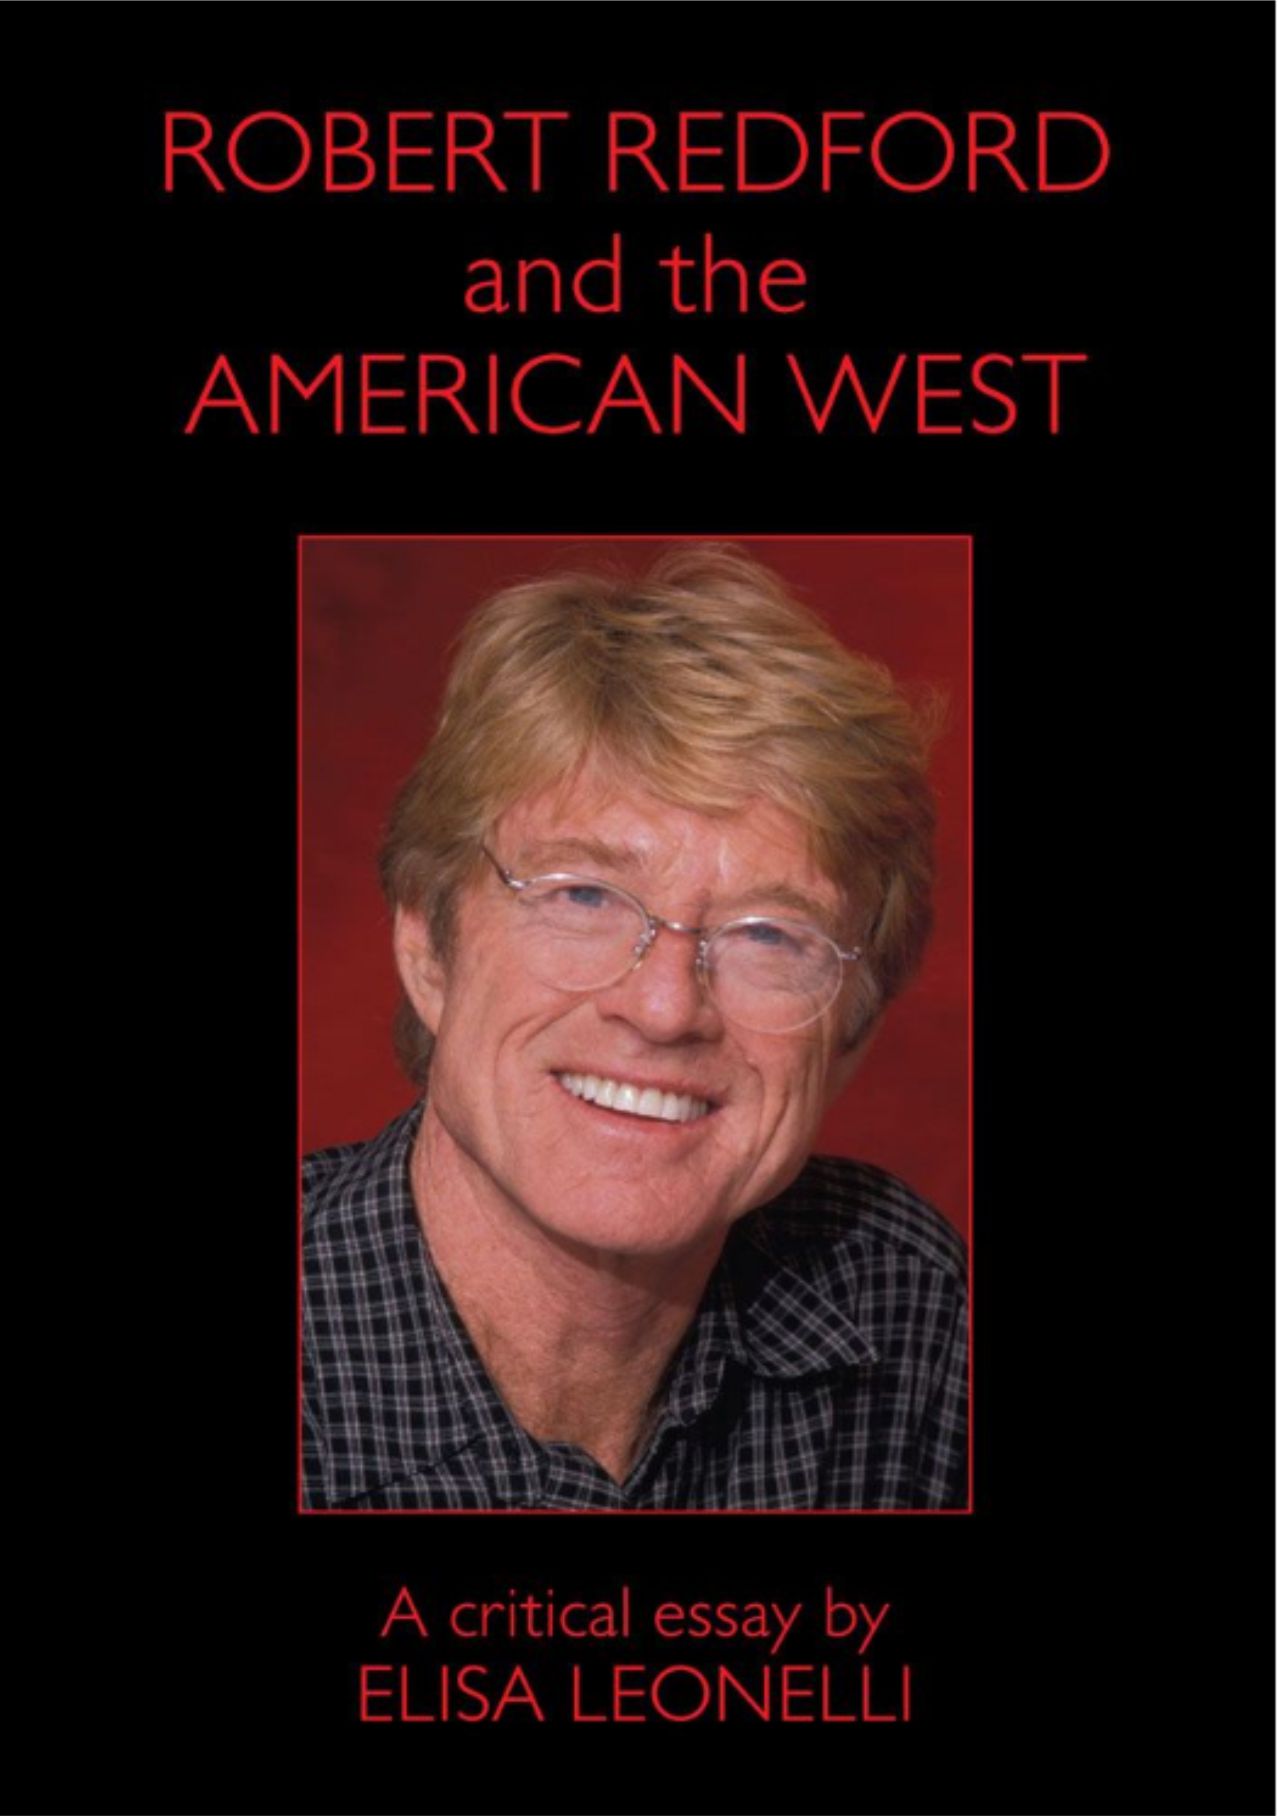 Robert Redford and the American West book